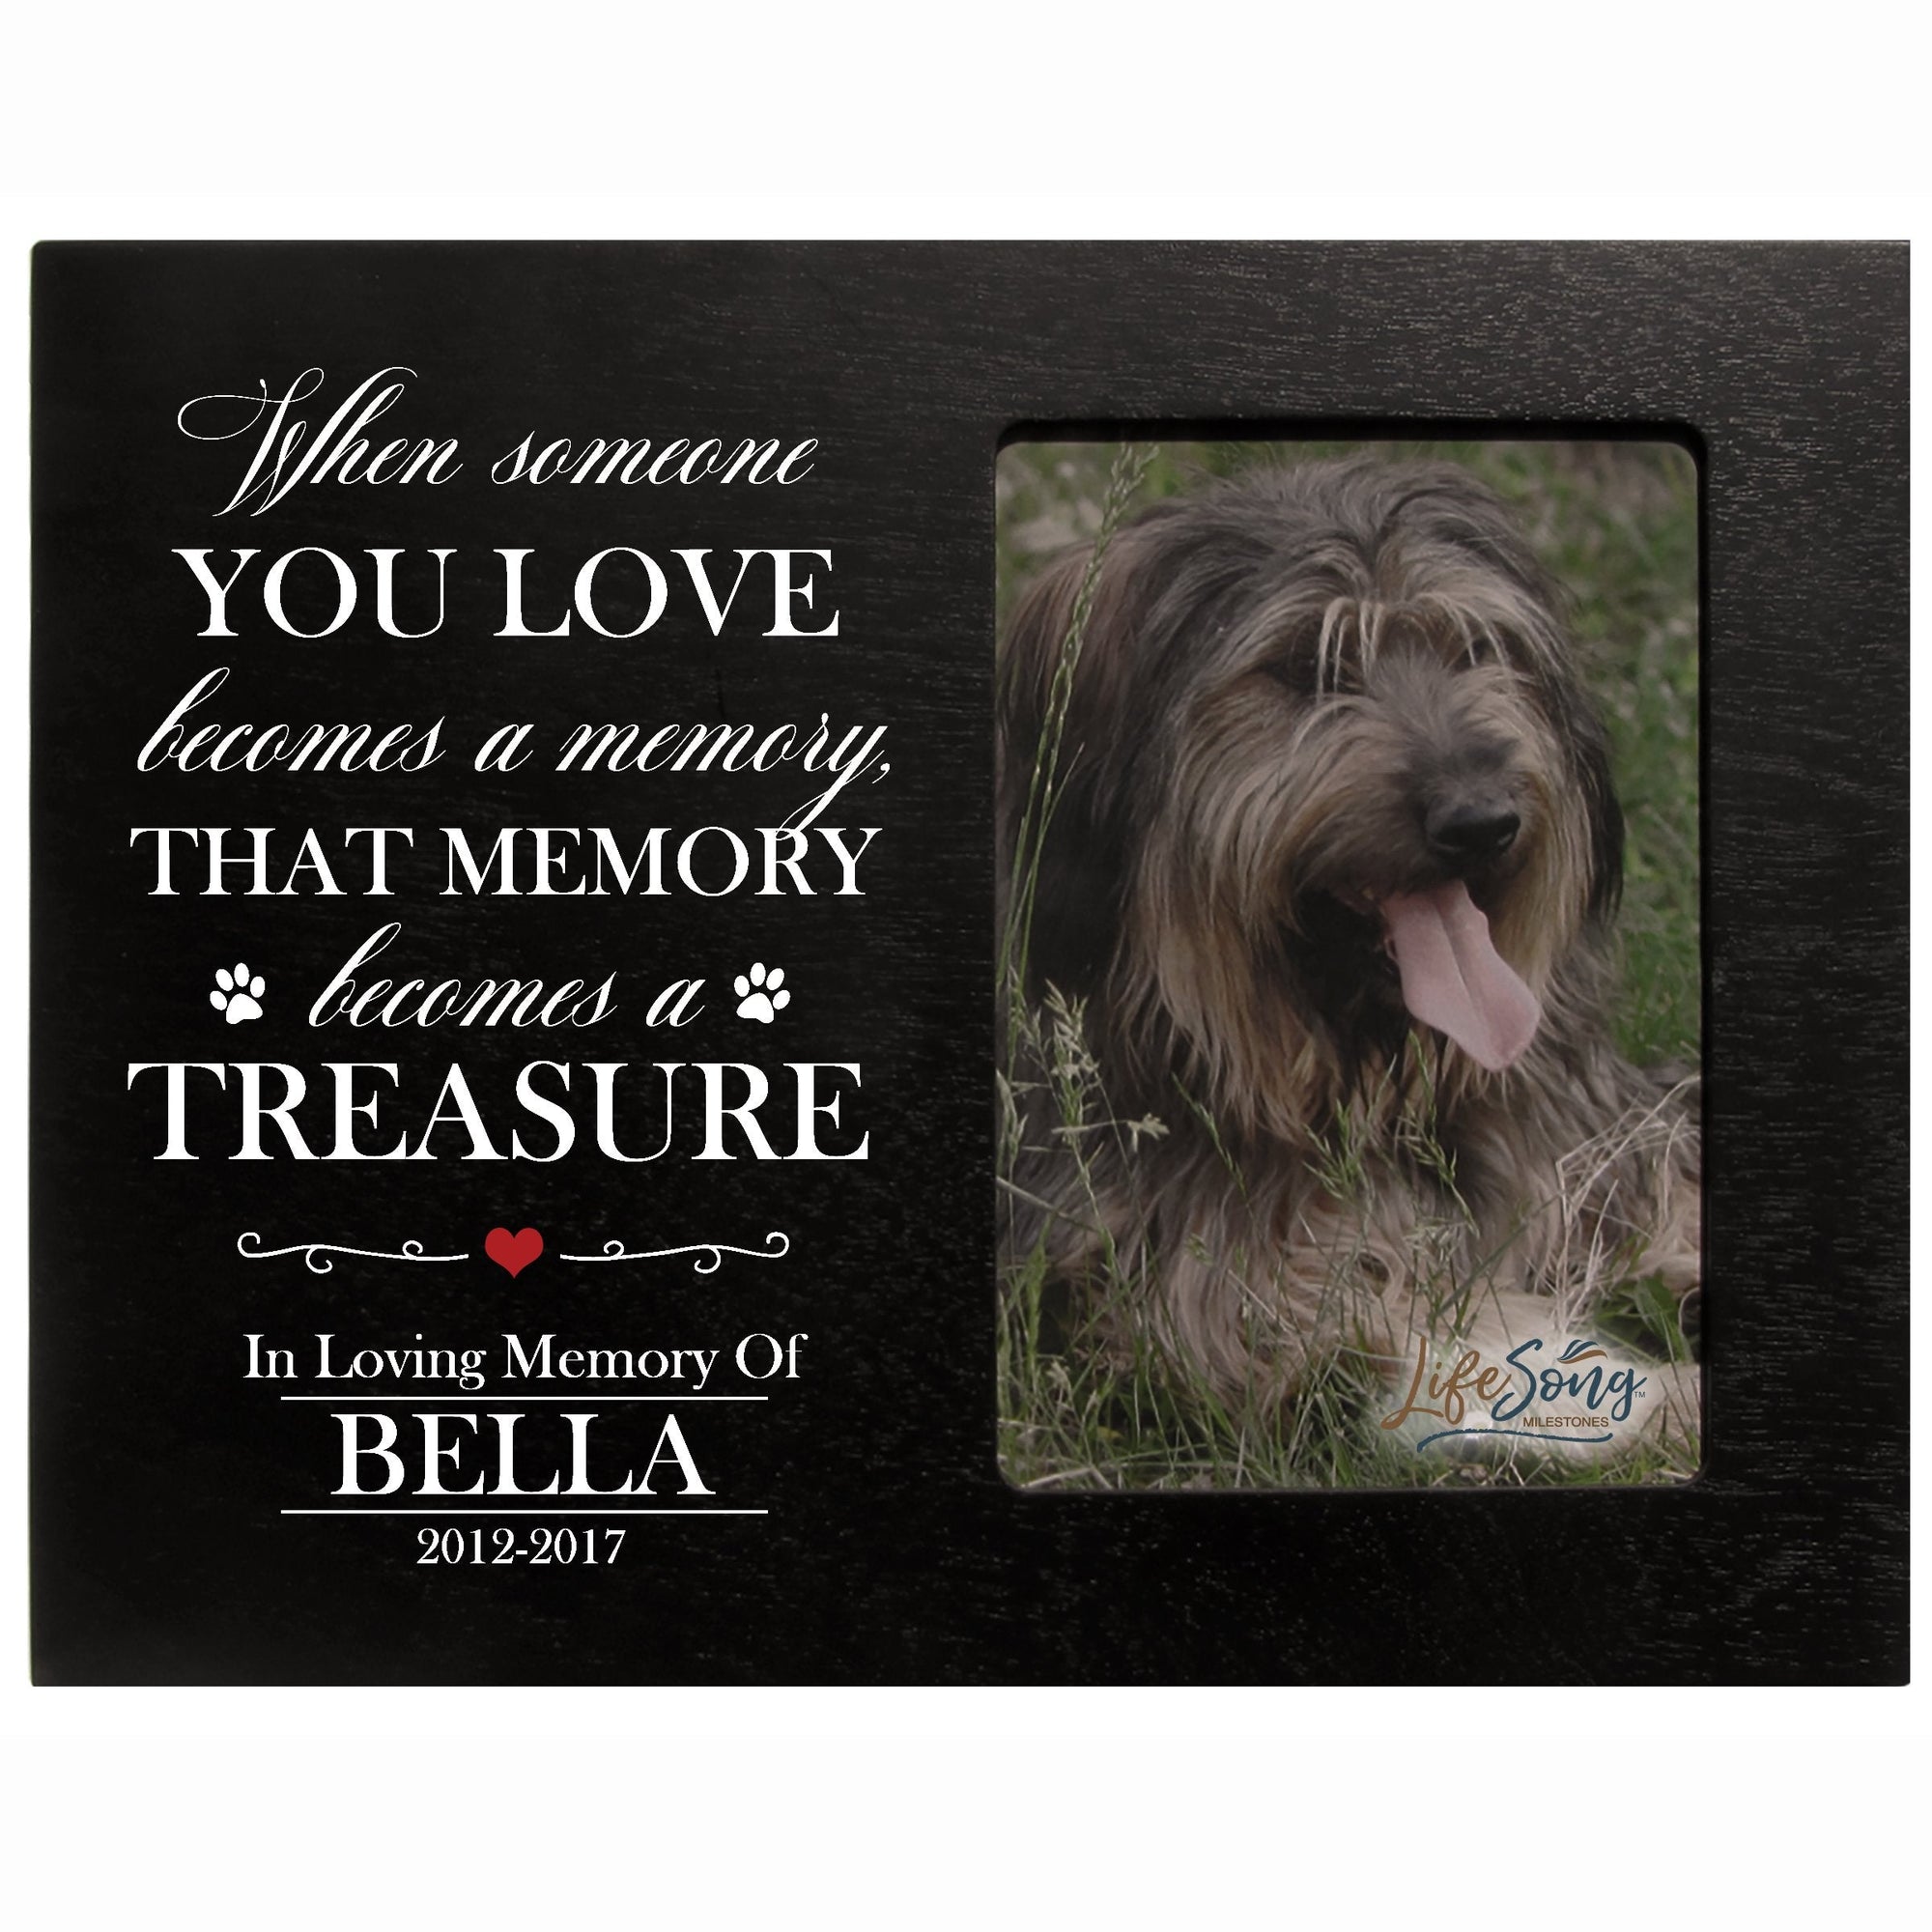 8x10 Black Pet Memorial Picture Frame with the phrase "When Someone You Love Becomes A Memory"